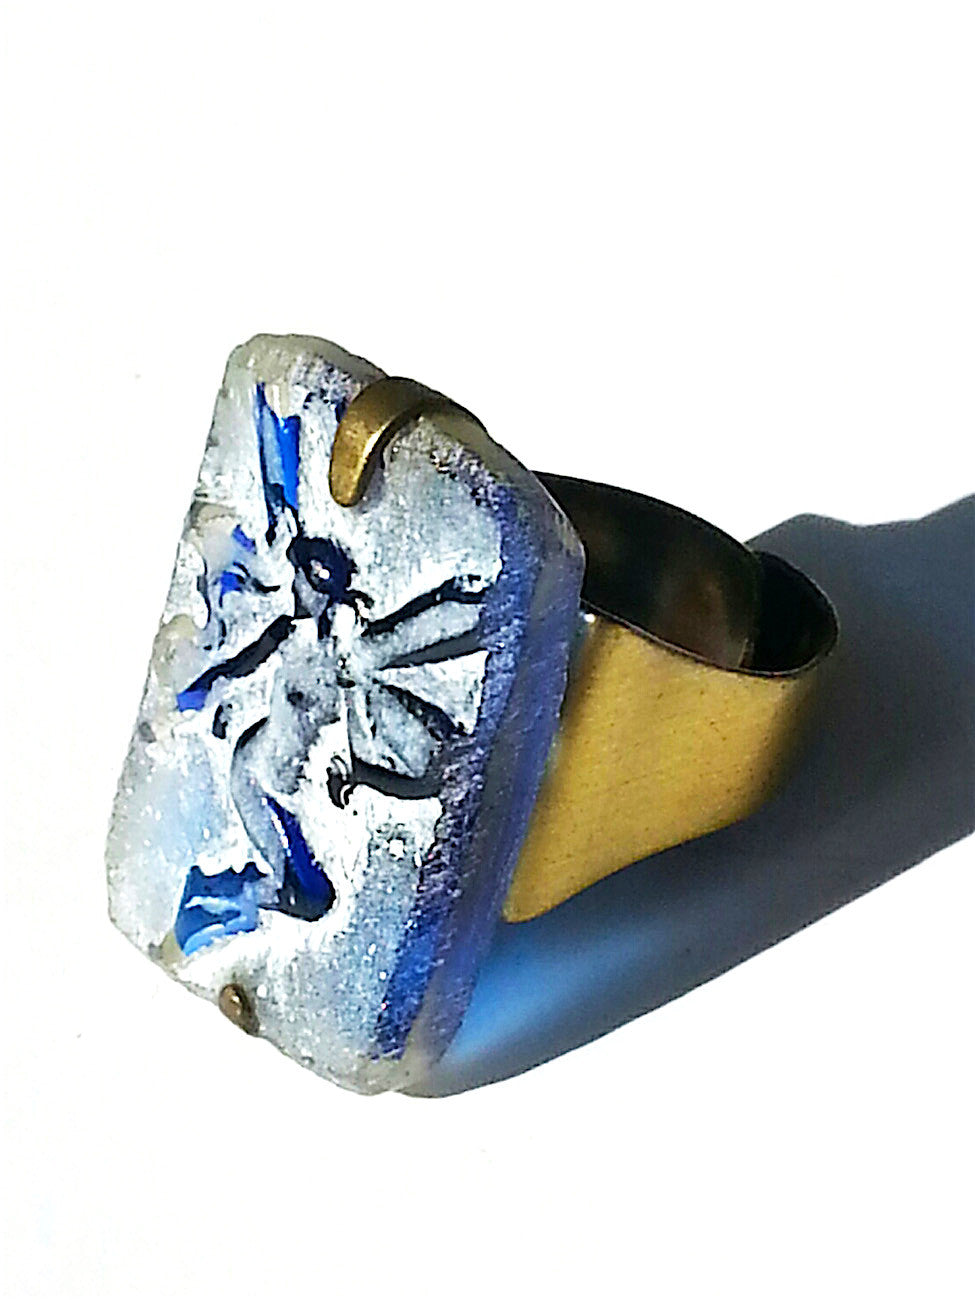 Ring Hand Cast French Glass Fairy Blue